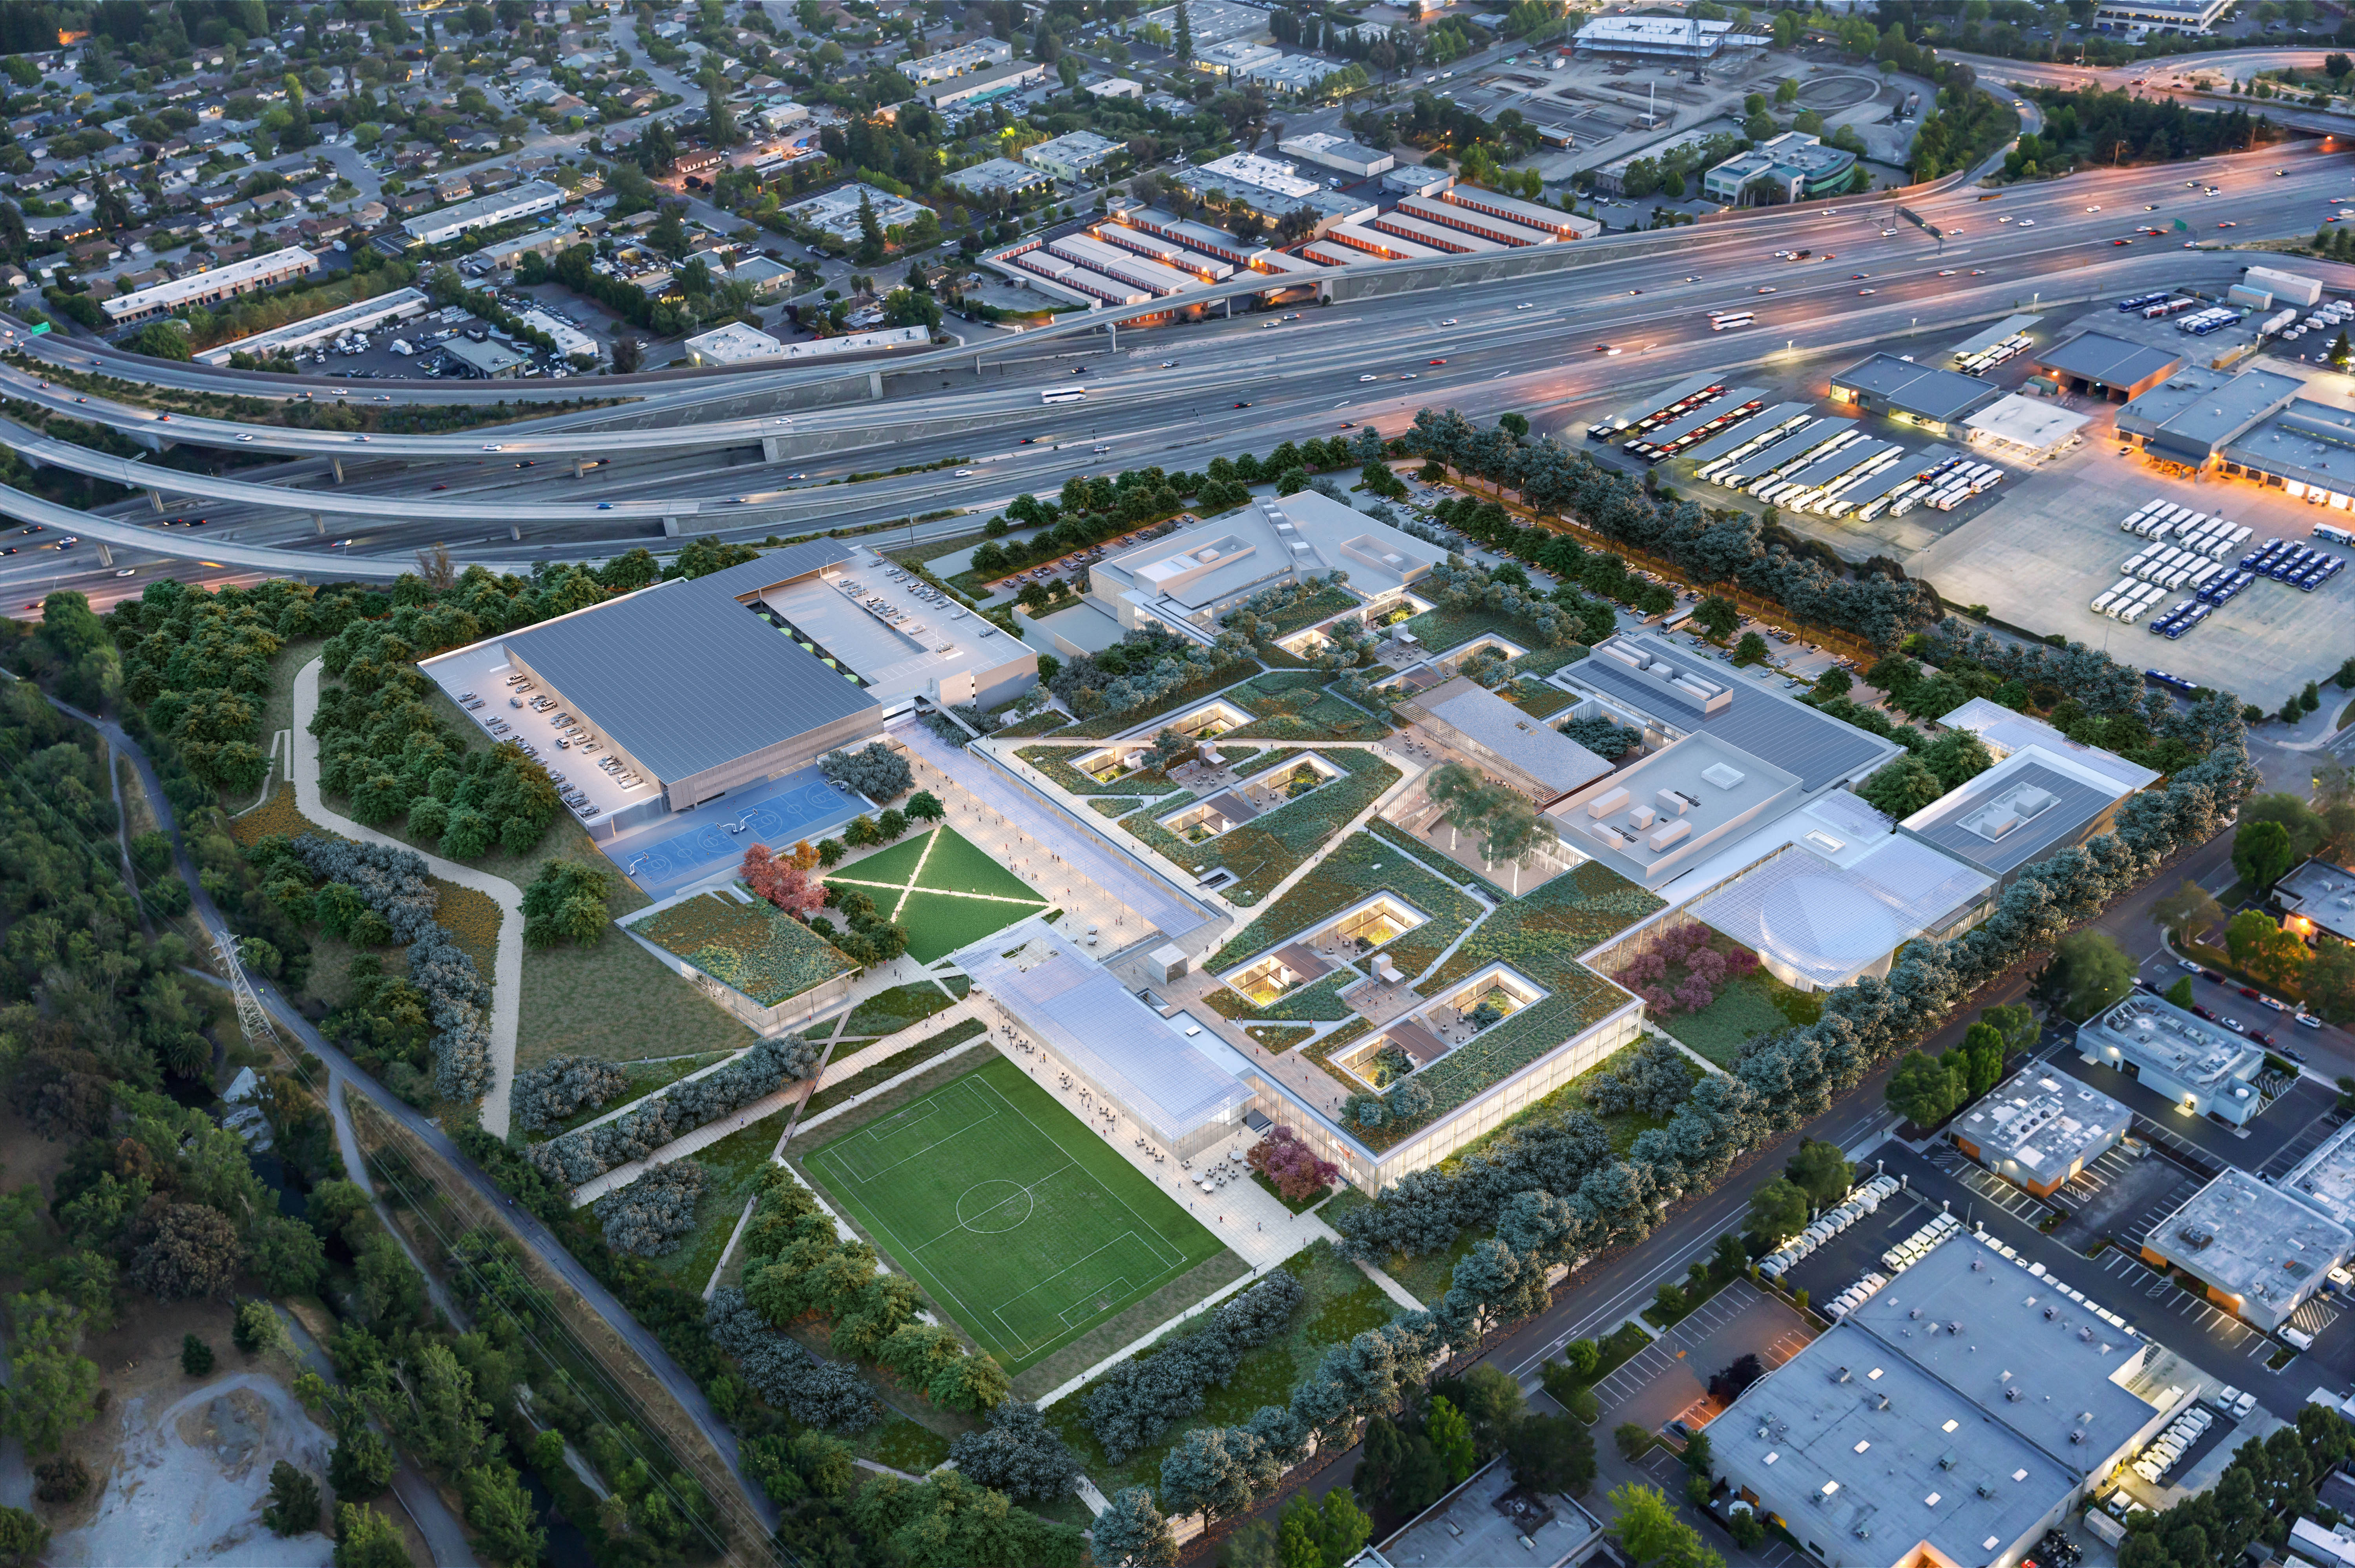 Photo shows aerial view of sleek buildings and a soccer field surrounded by greenery next to a freeway